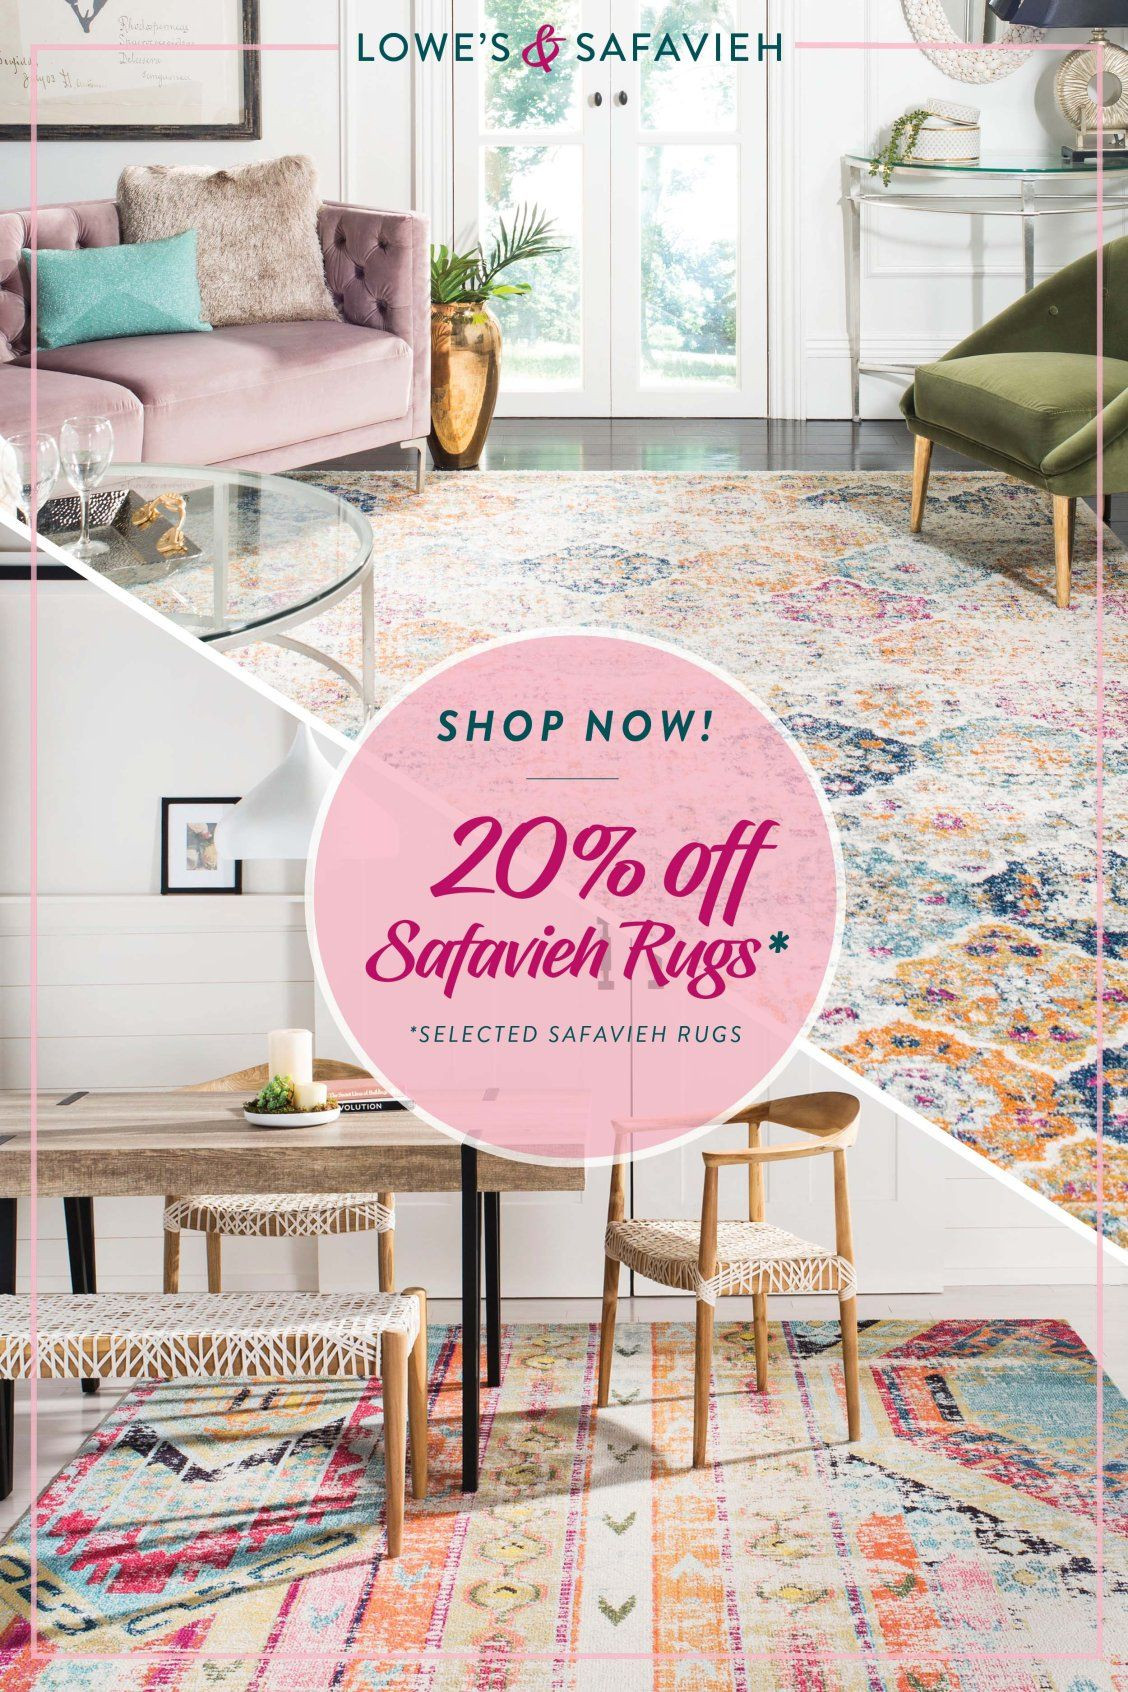 Lowes Living Room Rugs
 Decorate your home with unique and stylish Safavieh rugs